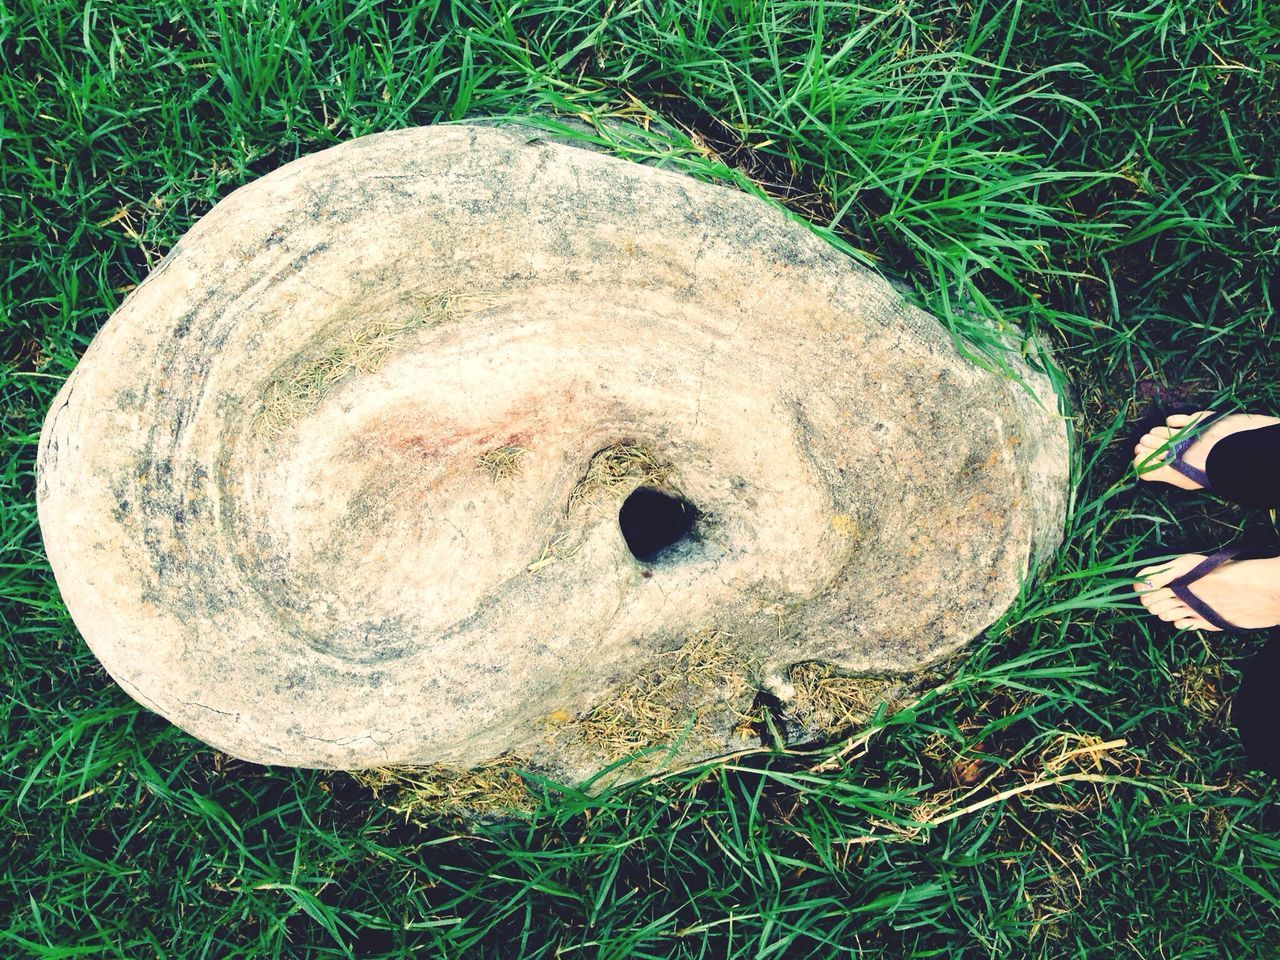 grass, field, high angle view, grassy, abandoned, close-up, circle, old, outdoors, nature, damaged, no people, day, dirty, ground, mushroom, directly above, shape, broken, stone - object